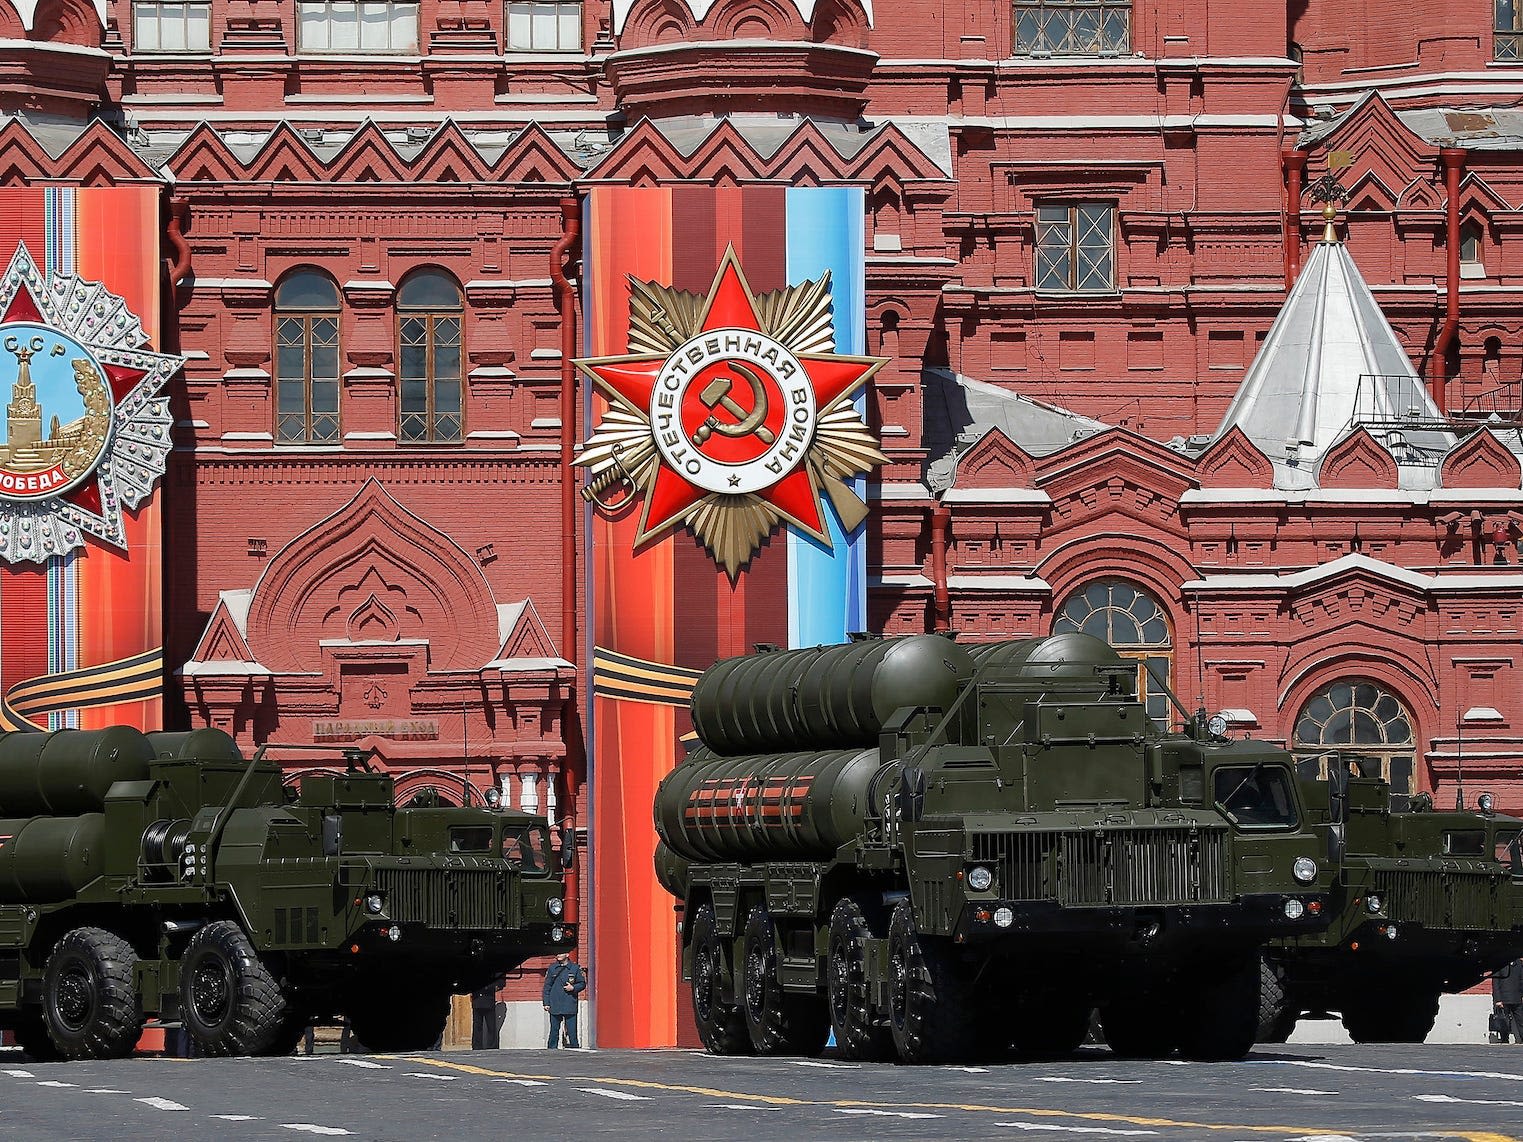 Russia's fearsome S-400 air-defense system isn't quite living up to the hype in Ukraine